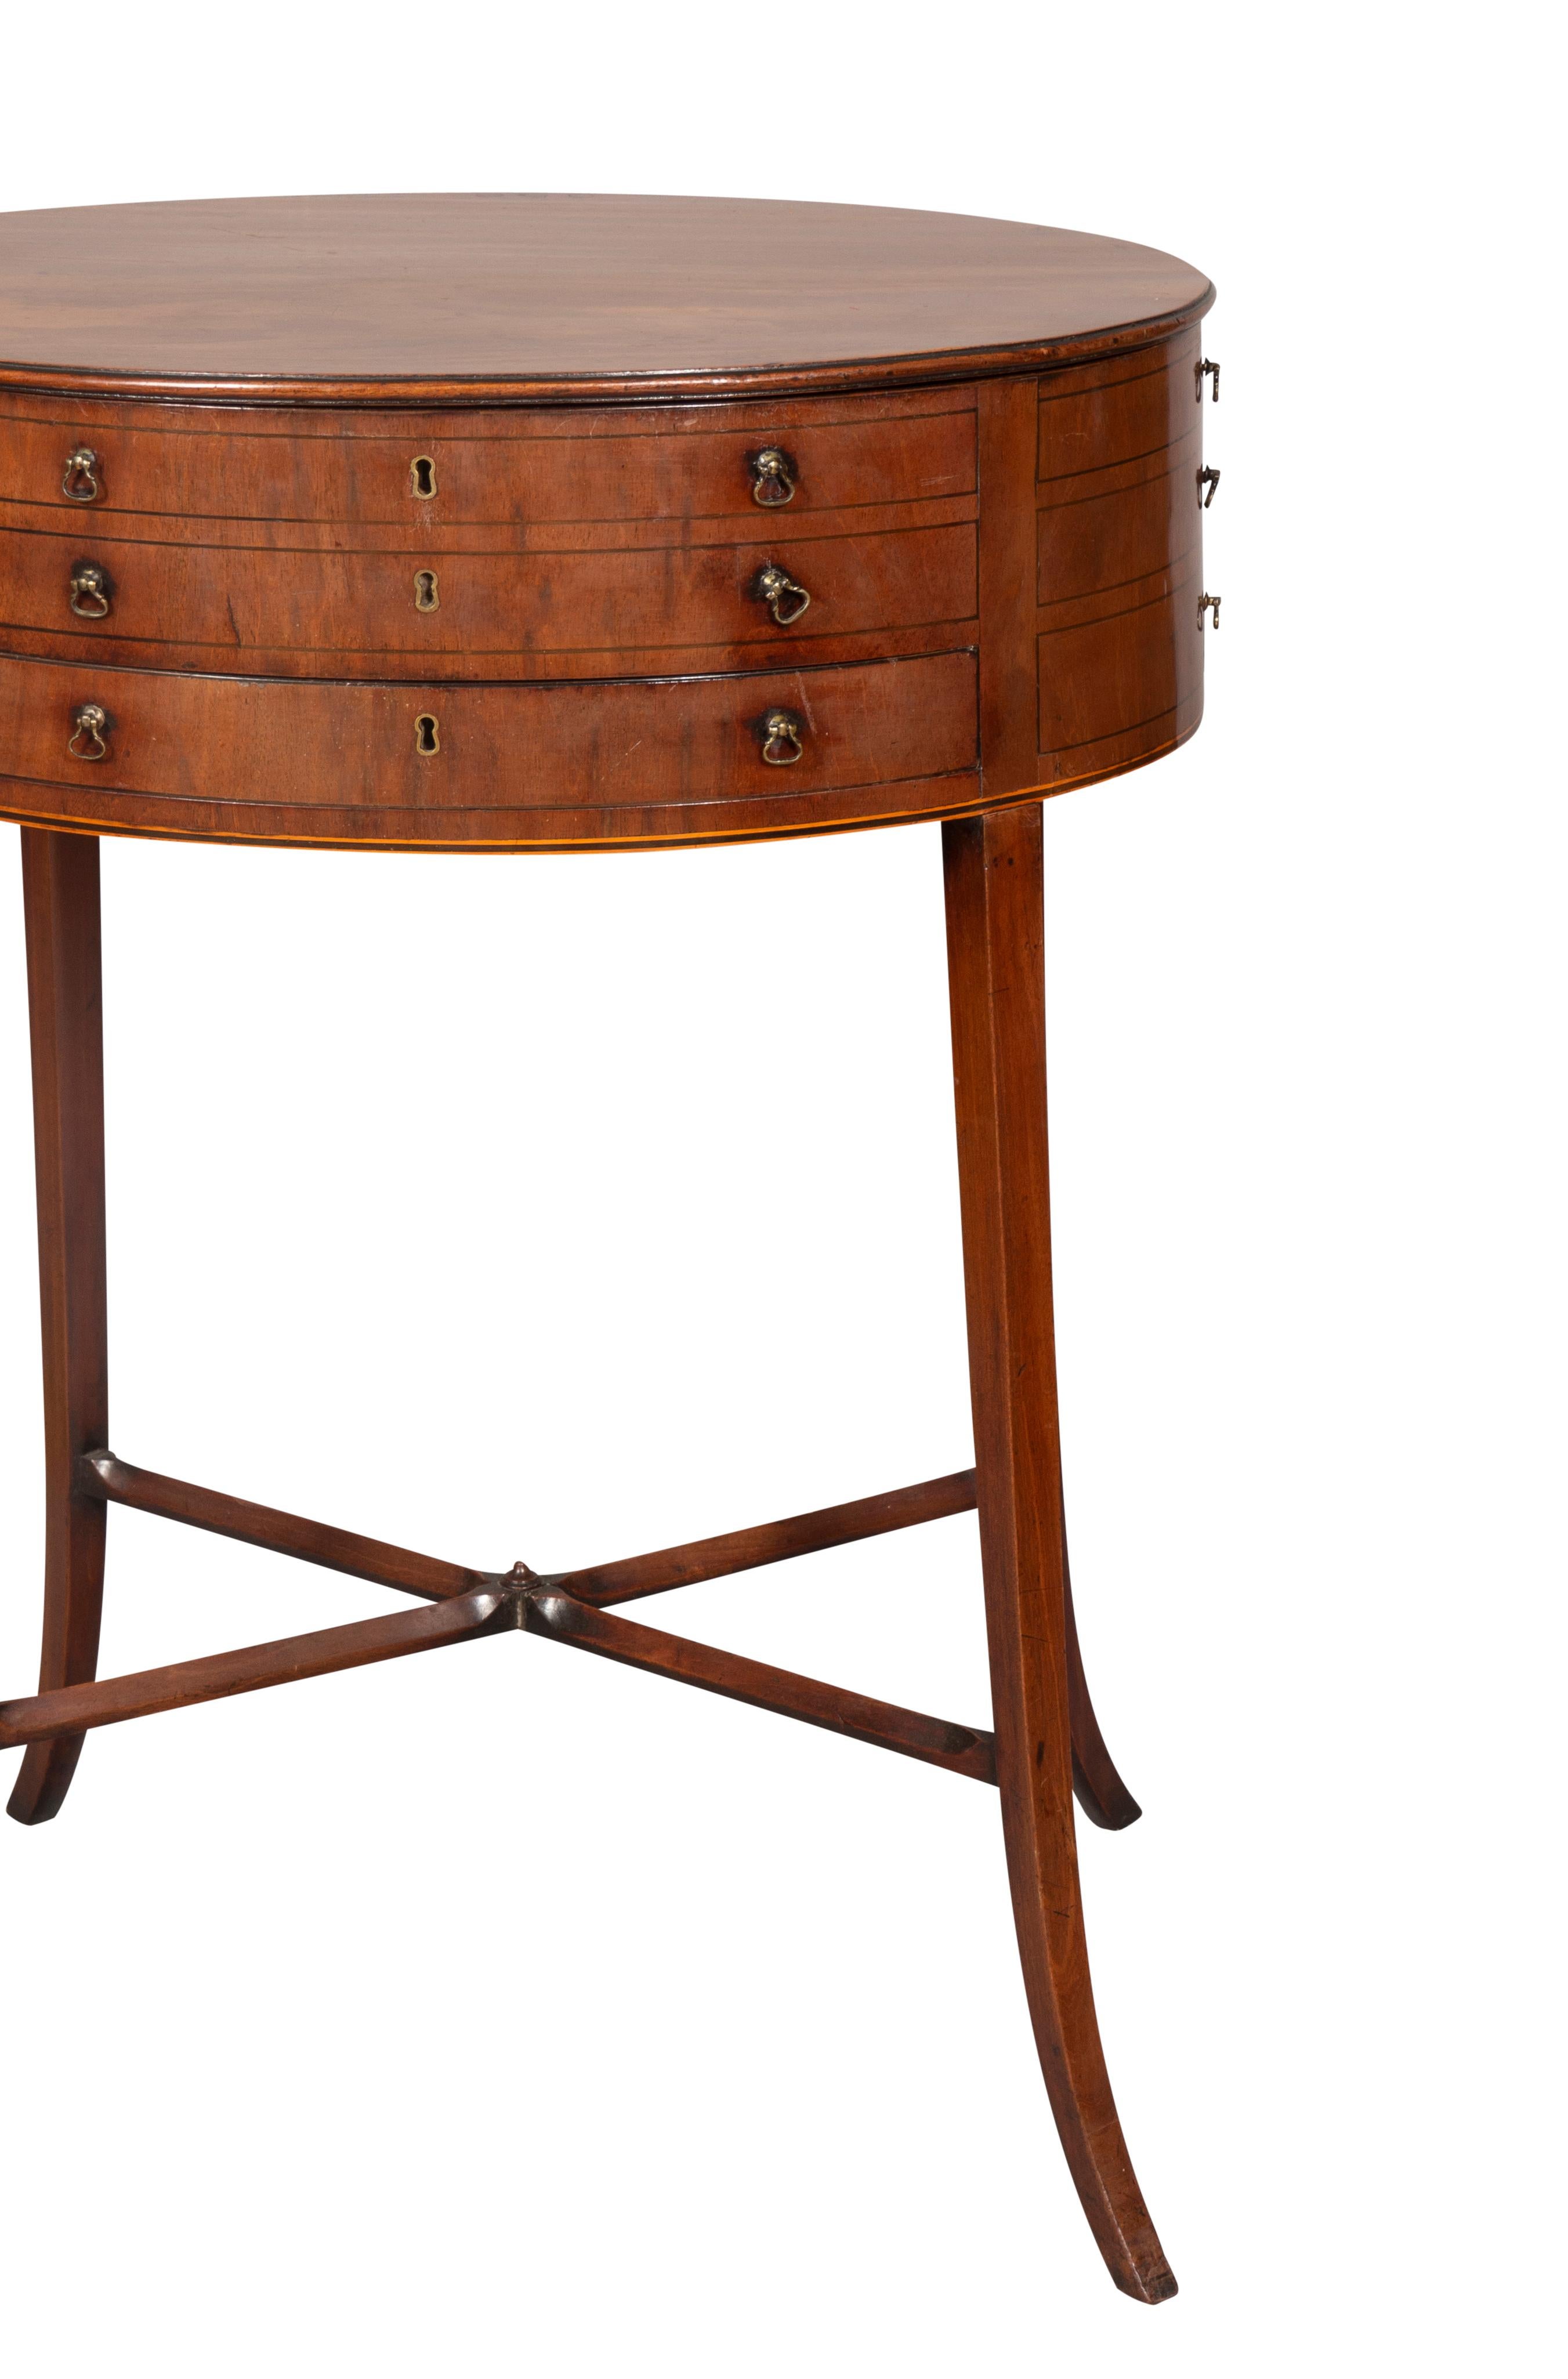 Late 18th Century George III Mahogany Work Table For Sale